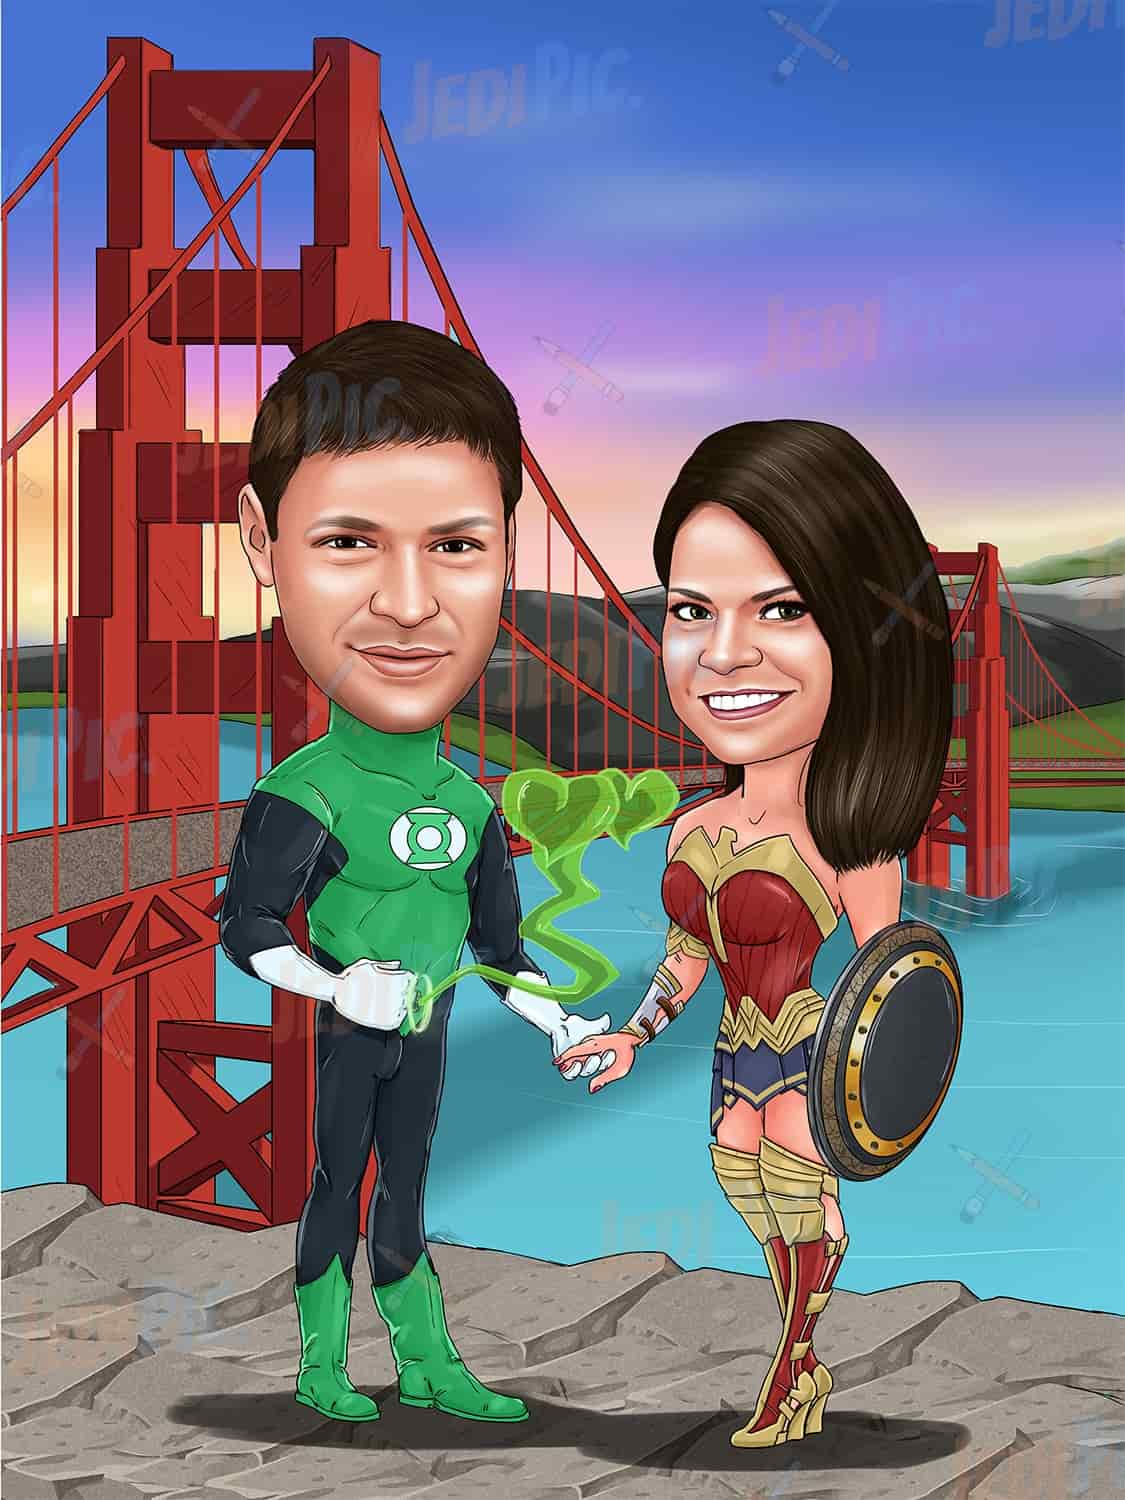 Couple as Superheroes - Valentines Day Gift